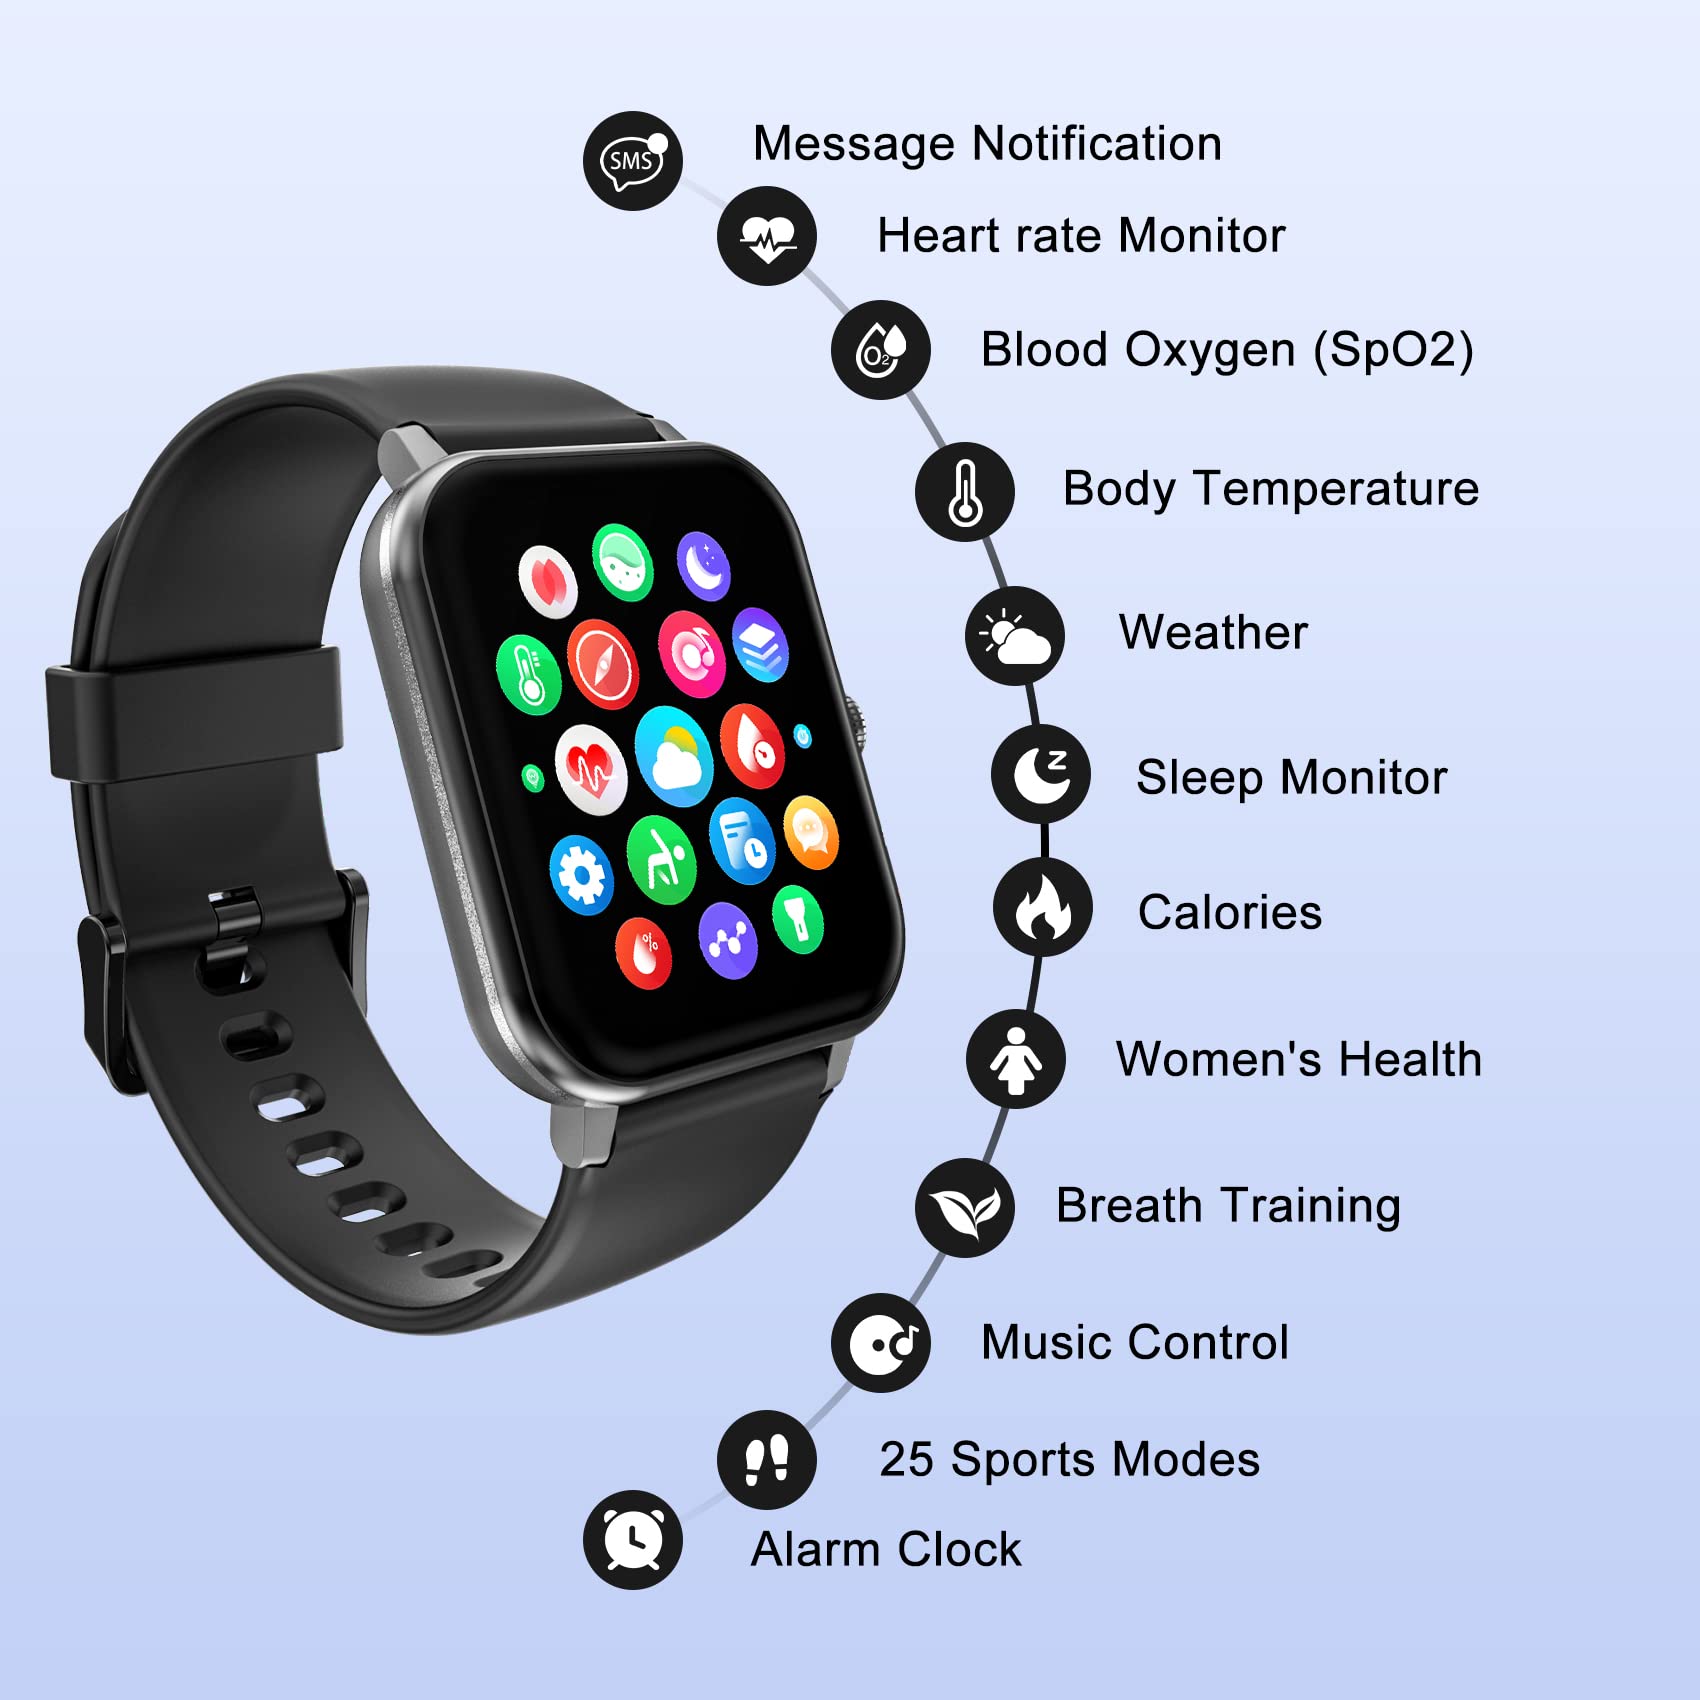 IOWODO Smart Watch for Men Women, Fitness Tracker with Waterproof IP68,Heart Rate Monitor,Blood Oxygen(SpO2),Pedometer,Stopwatch,25 Sport Modes,Body Thermometer,Weather,Smartwatch for Android iOS